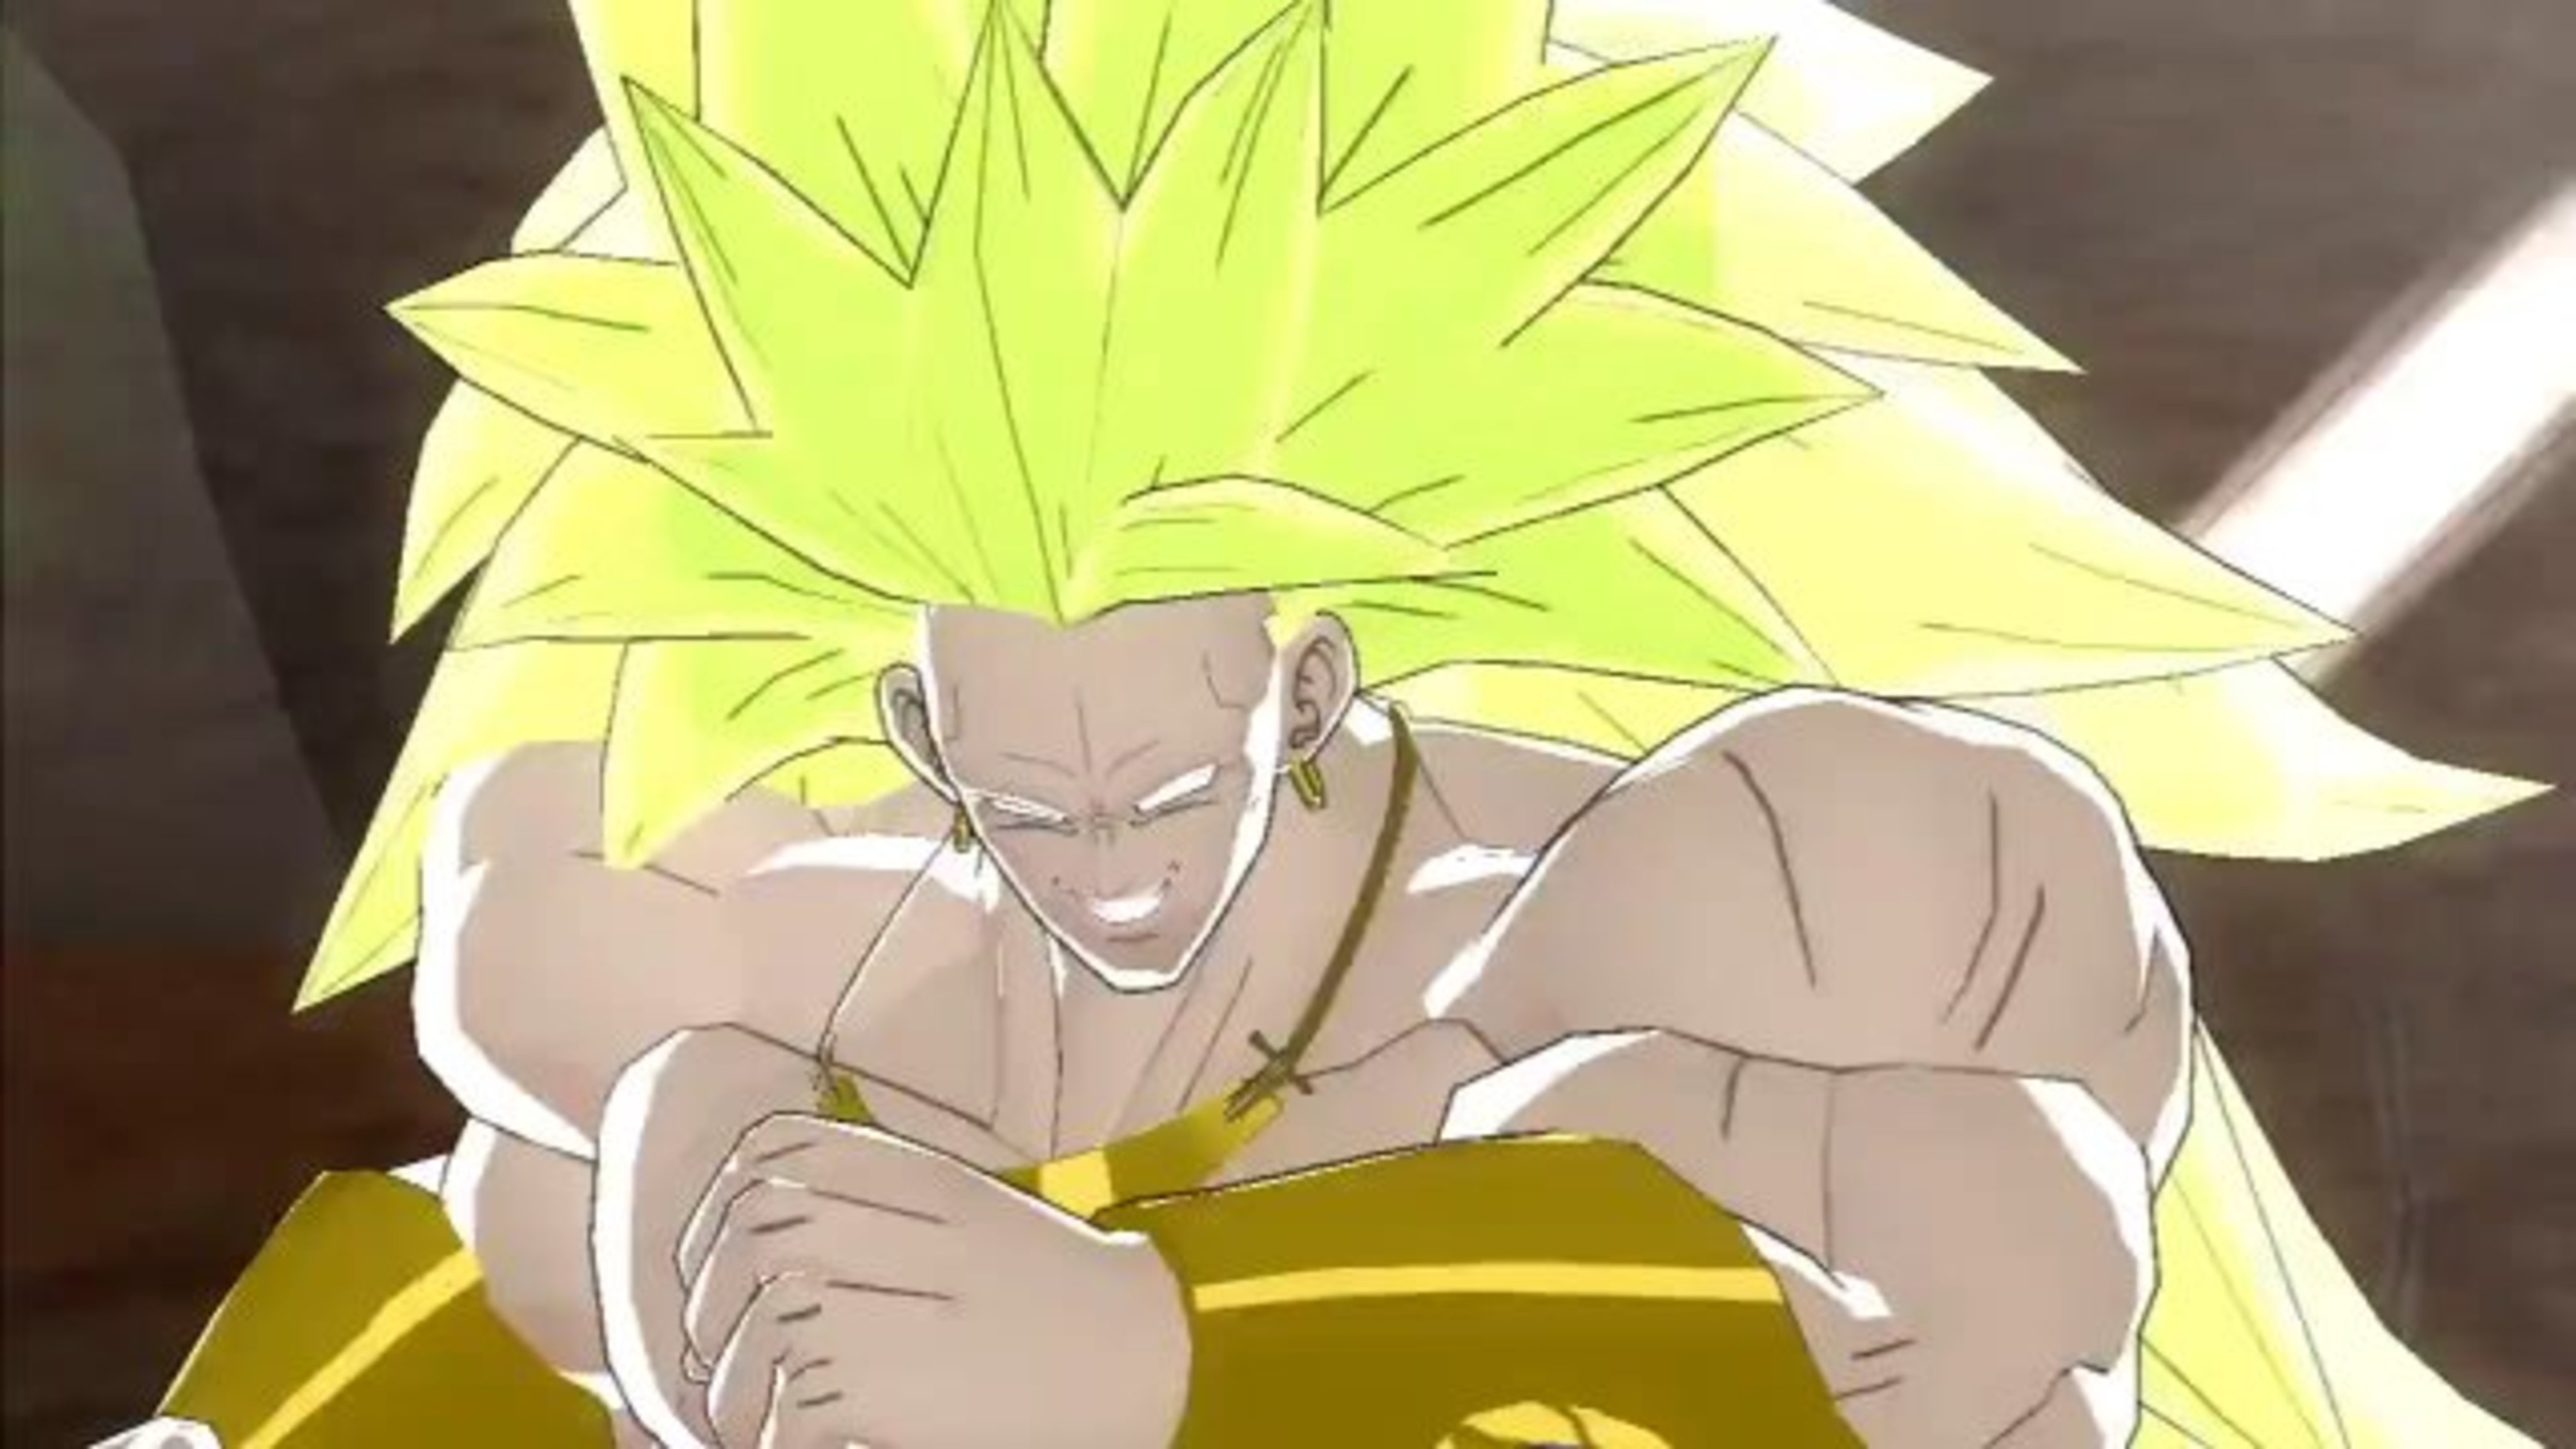 And now Brolly. [QUOTE=fencedude]thats super saiyan 2 not ssj3 and even its 